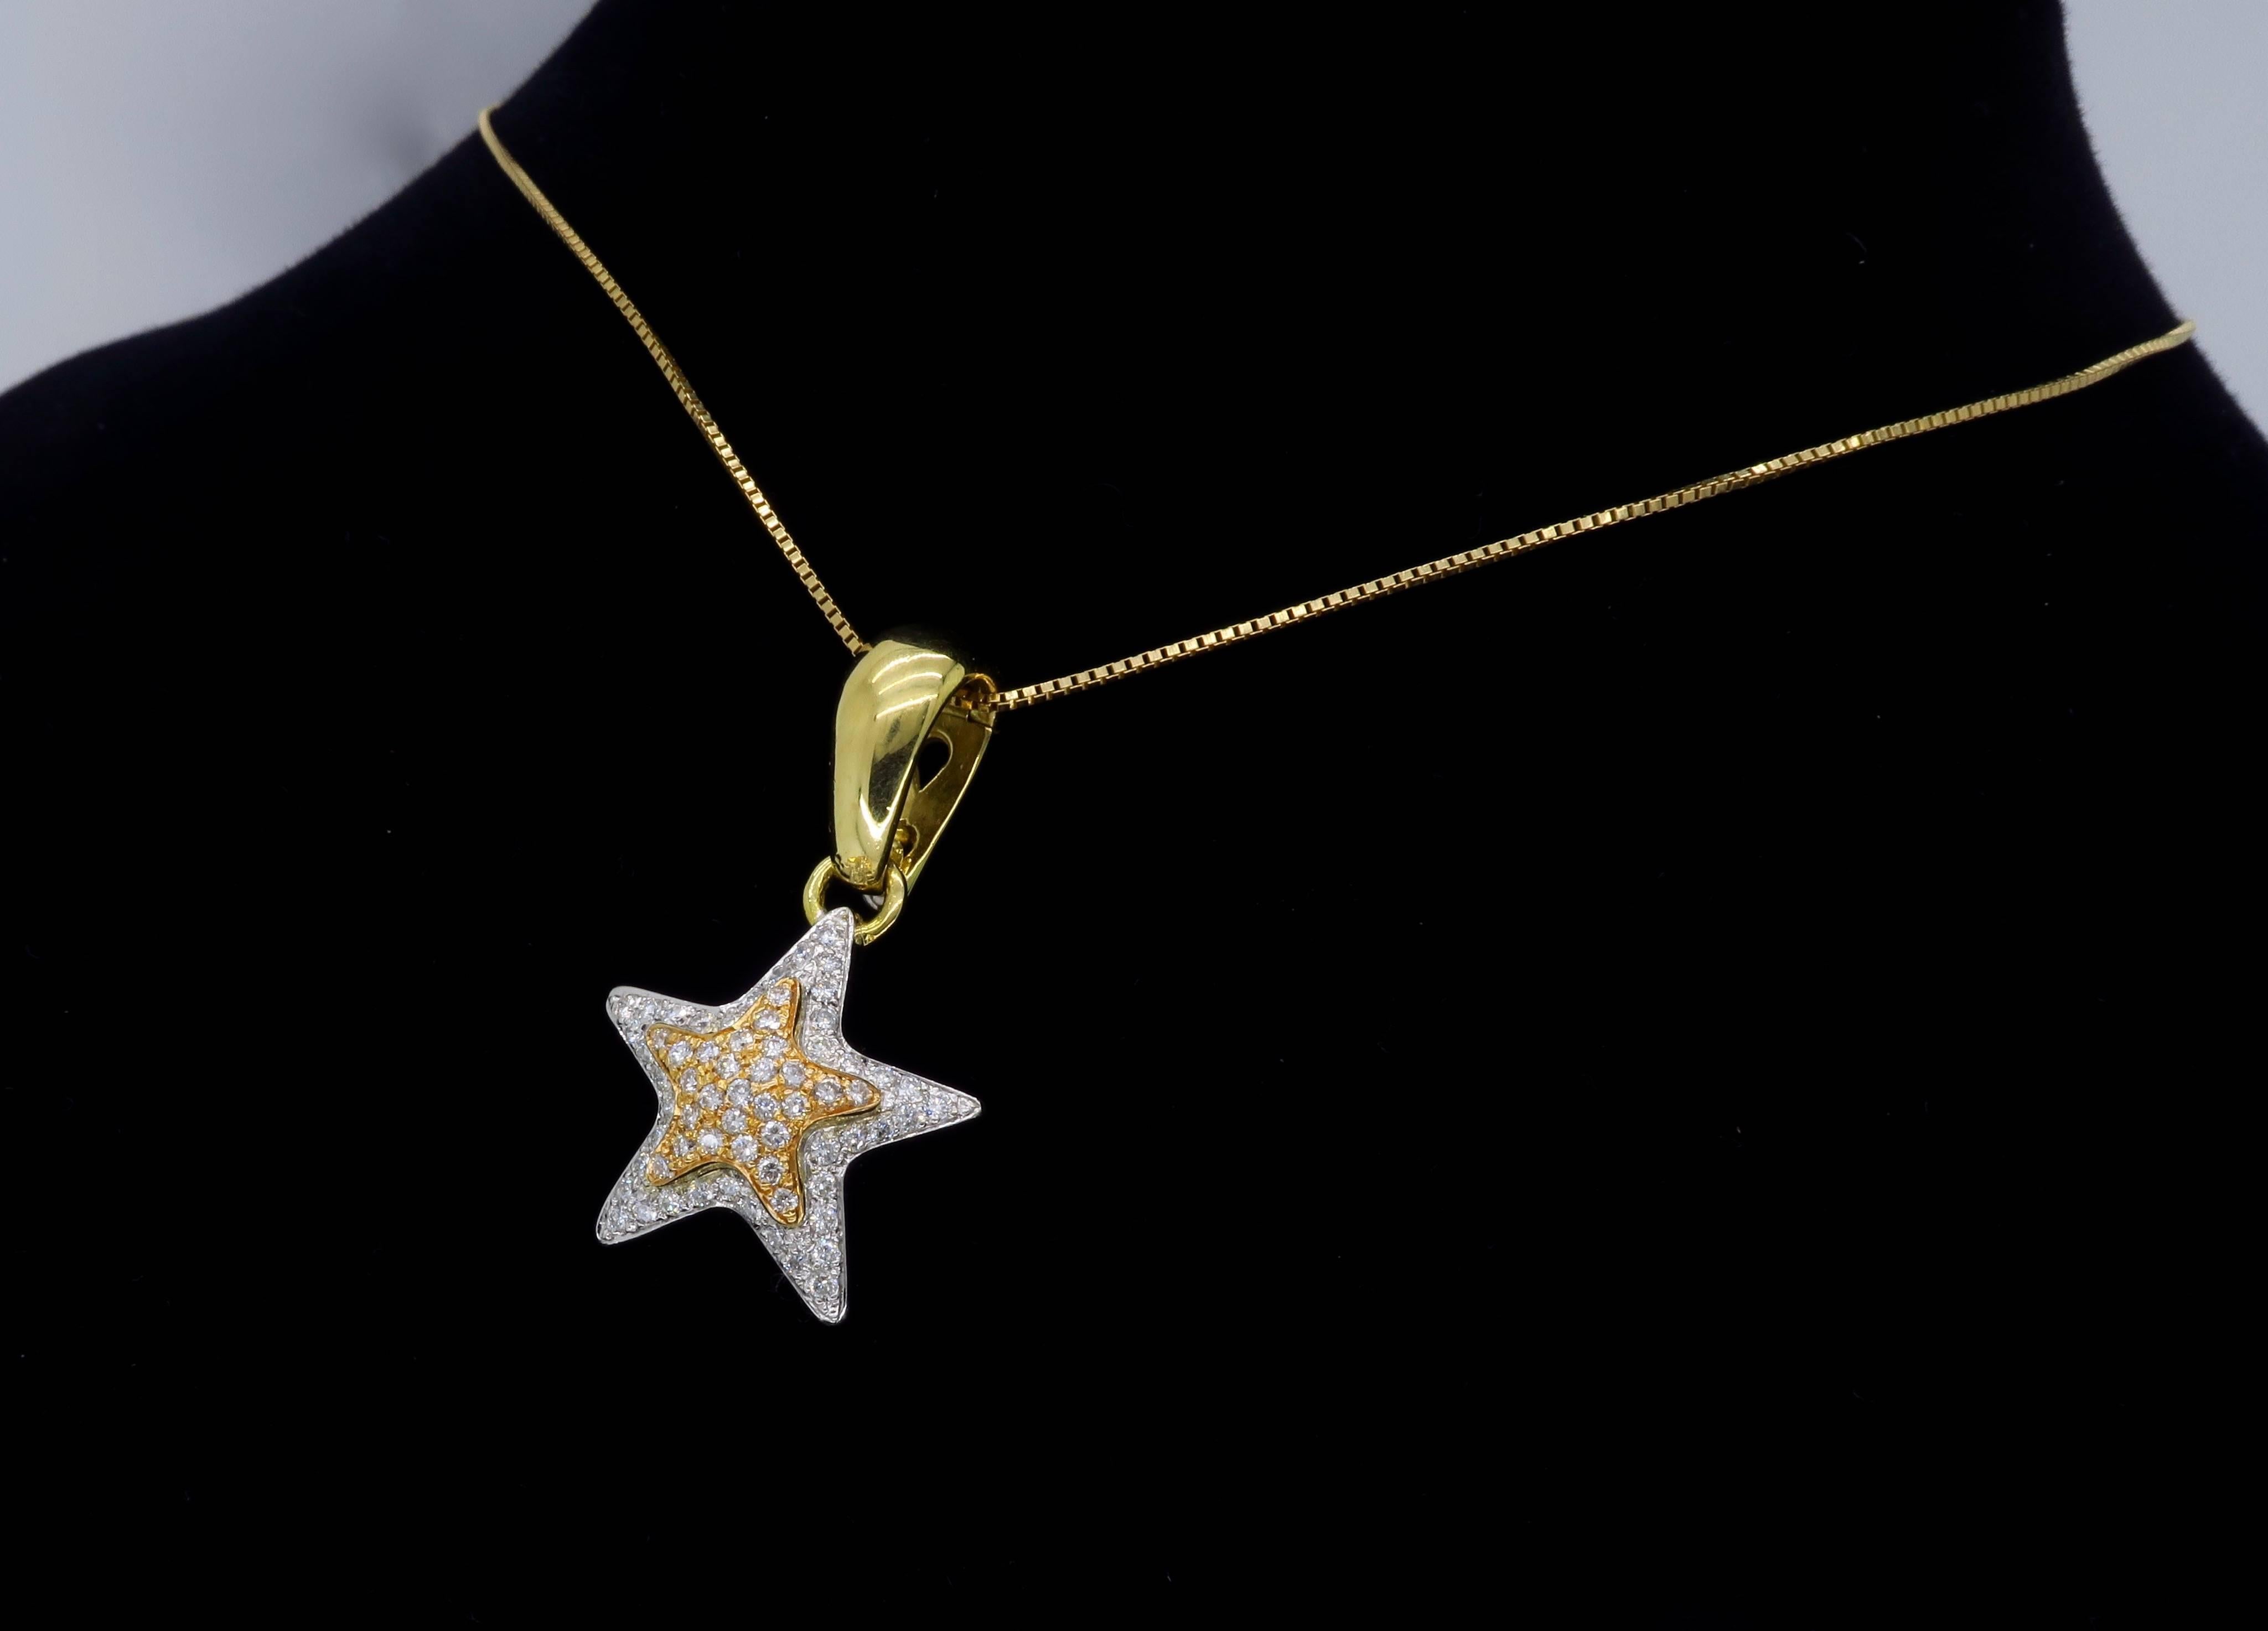 Designer Chimento pendant features 67 Round Brilliant Cut Diamonds, .75ctw with G-I color, and VS-SI clarity. The pendant is 18K yellow gold and is on a 14K yellow gold. The necklace weighs 12.0 grams, and is 19.5” long.